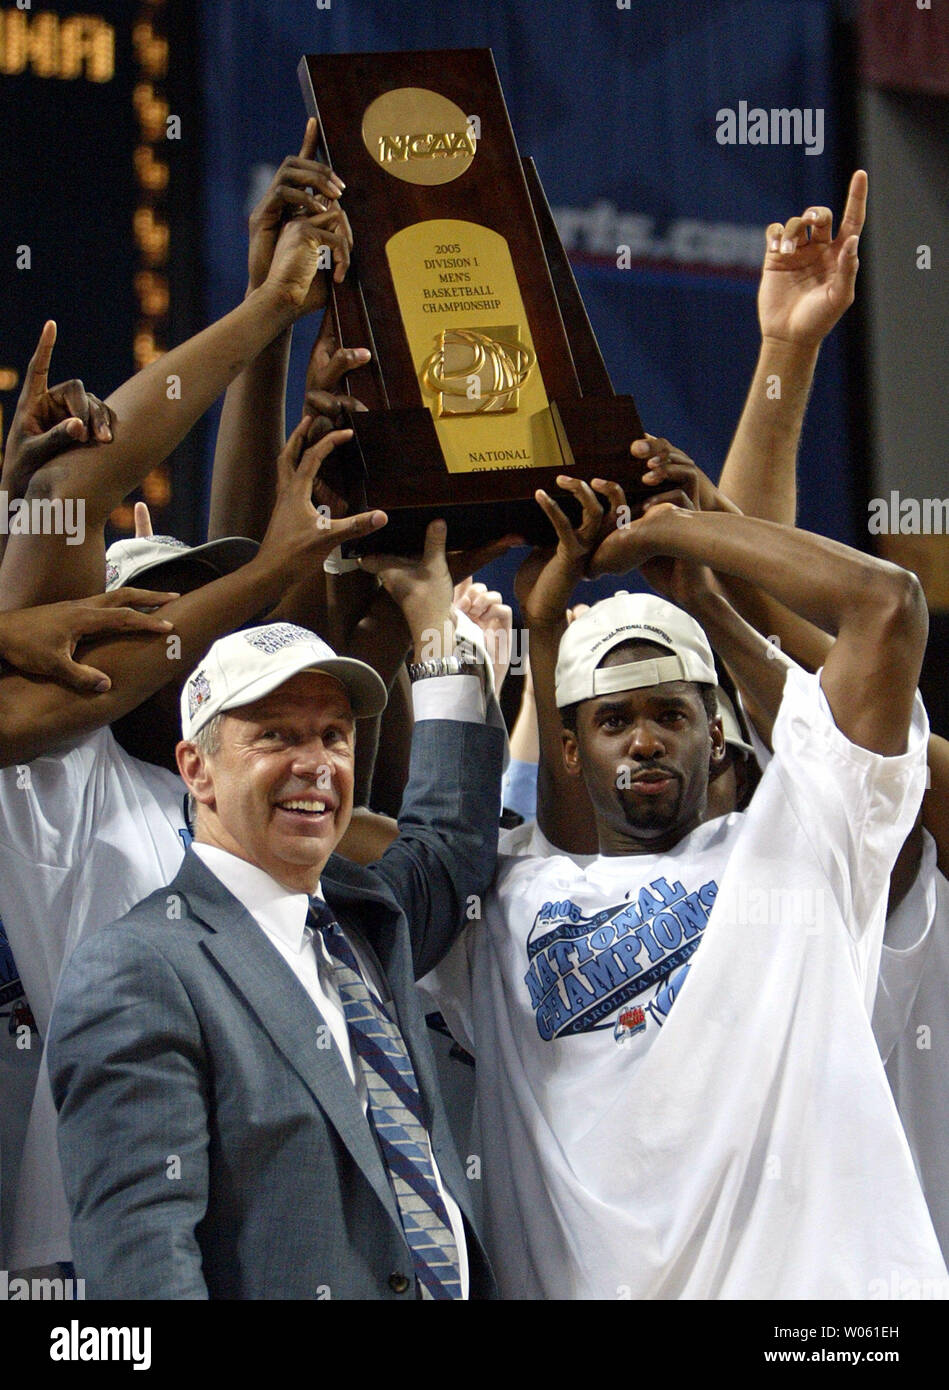 North Carolina head basketball coach Roy Williams (L) hoists the NCAA Mens  National Basketball Championship Trophy after defeating Illinois, 75-70 at  the Edward Jones Dome in St. Louis on April 4, 2005. (